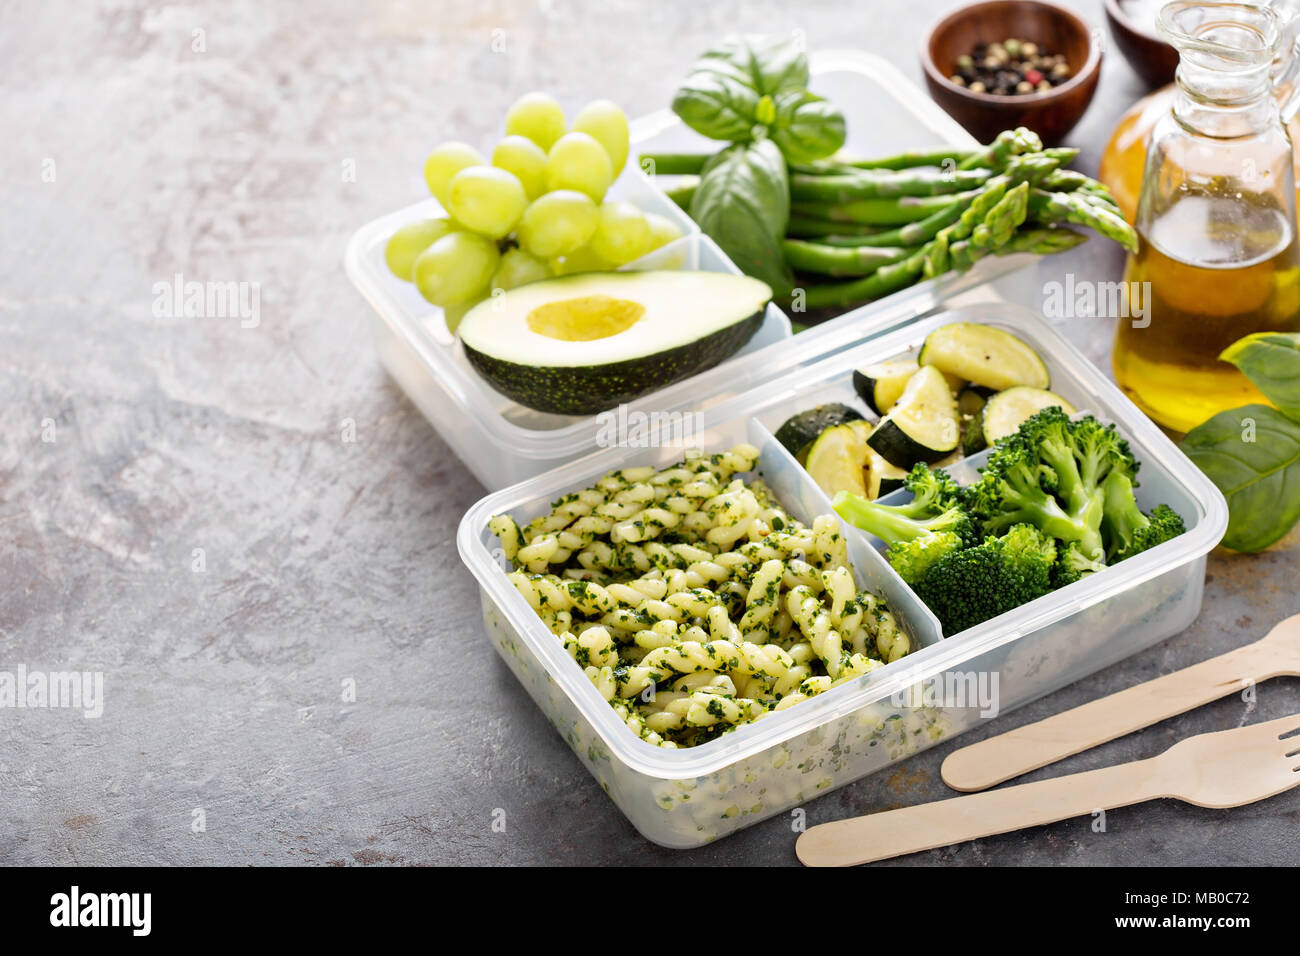 Vegan meal prep containers with pasta with green pesto sauce and vegetables Stock Photo